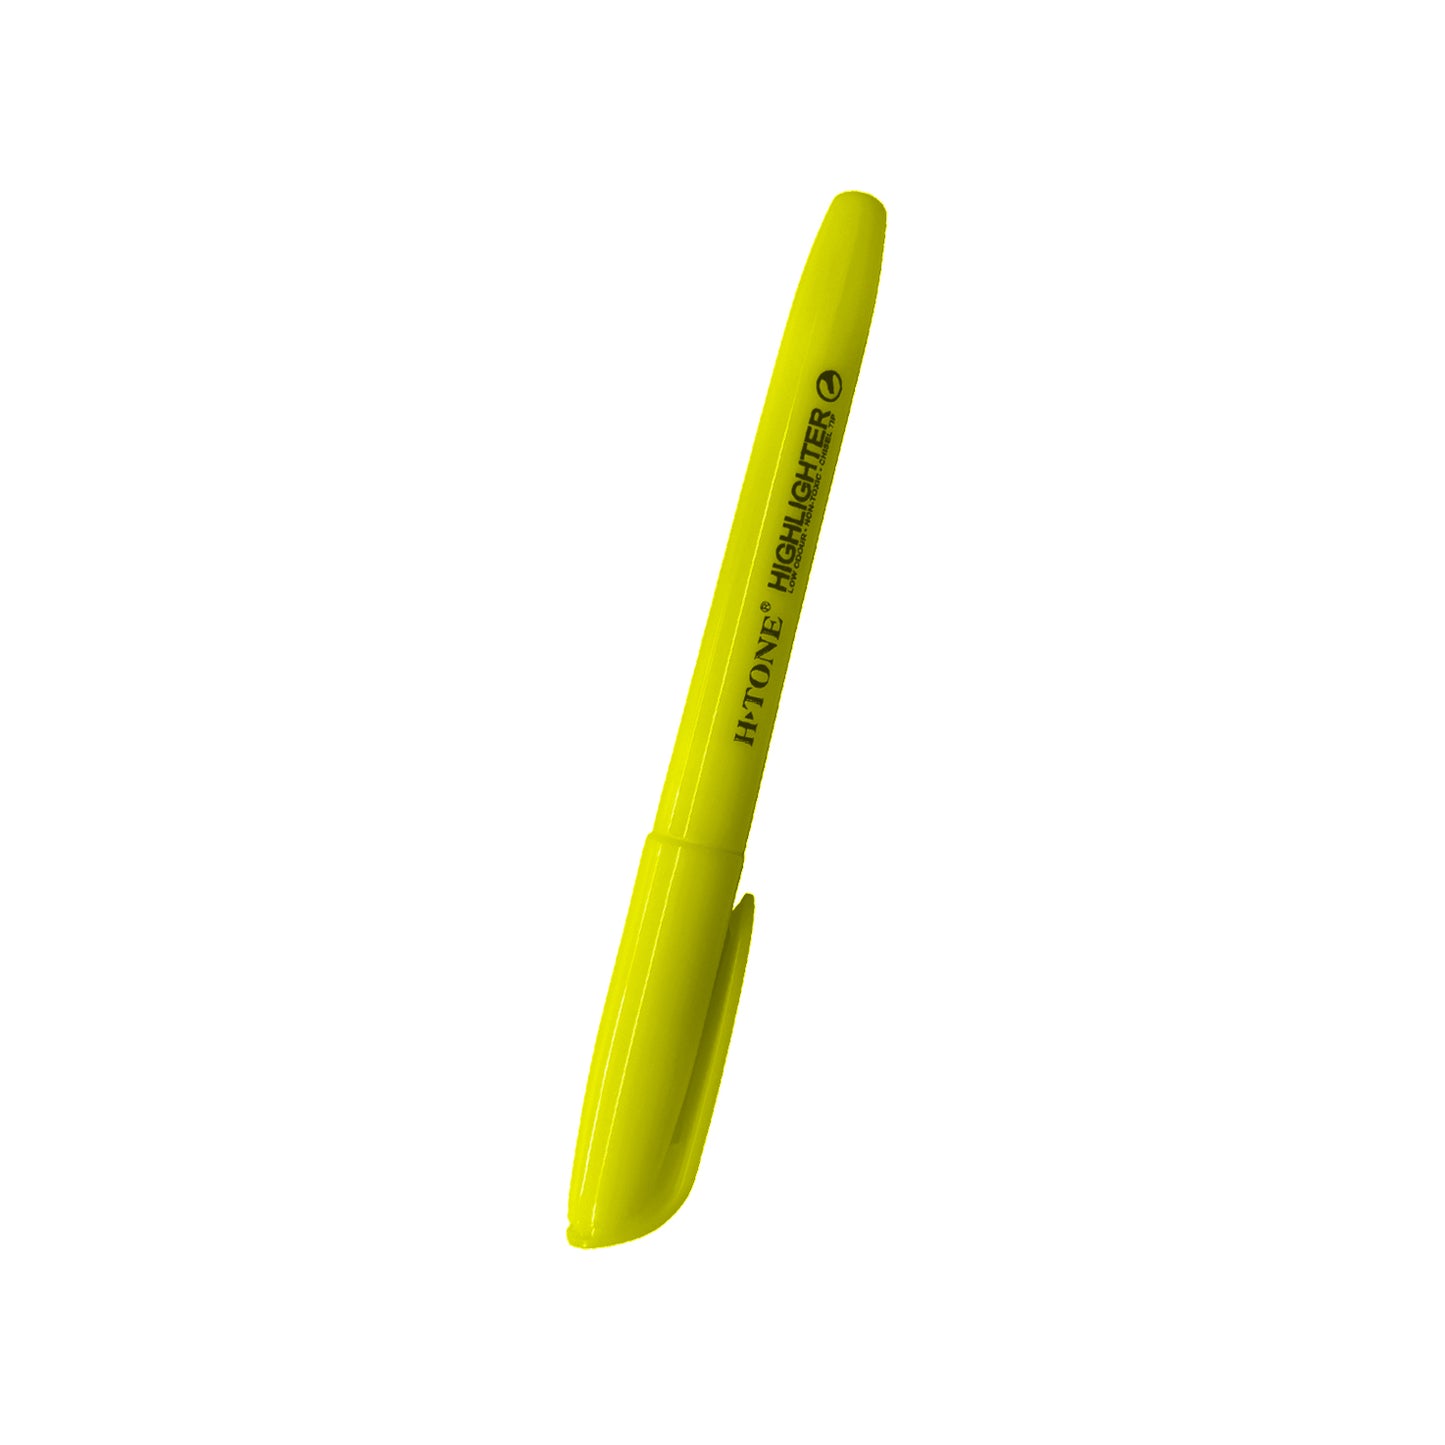 H-Tone Pocket Highlighter - Pink or Yellow